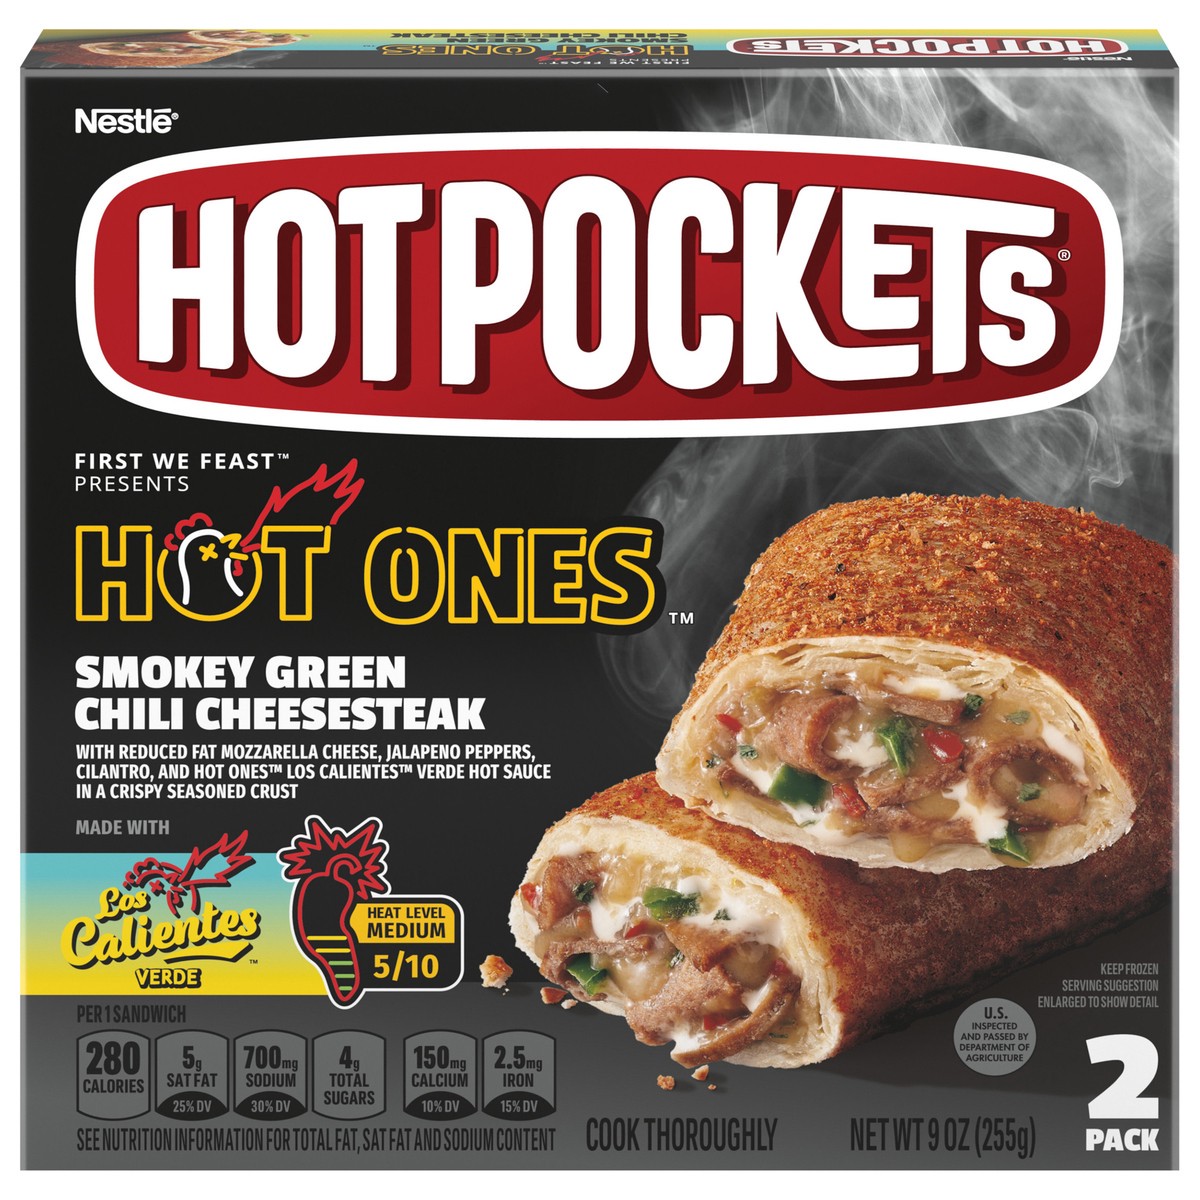 slide 1 of 9, Hot Pockets Hot Ones Smokey Green Chili Cheesesteak Frozen Snacks in a Crispy Buttery Crust, Steak and Cheese Sandwiches Made with Real Cheddar Cheese, 2 Count Frozen Sandwiches, 9 oz